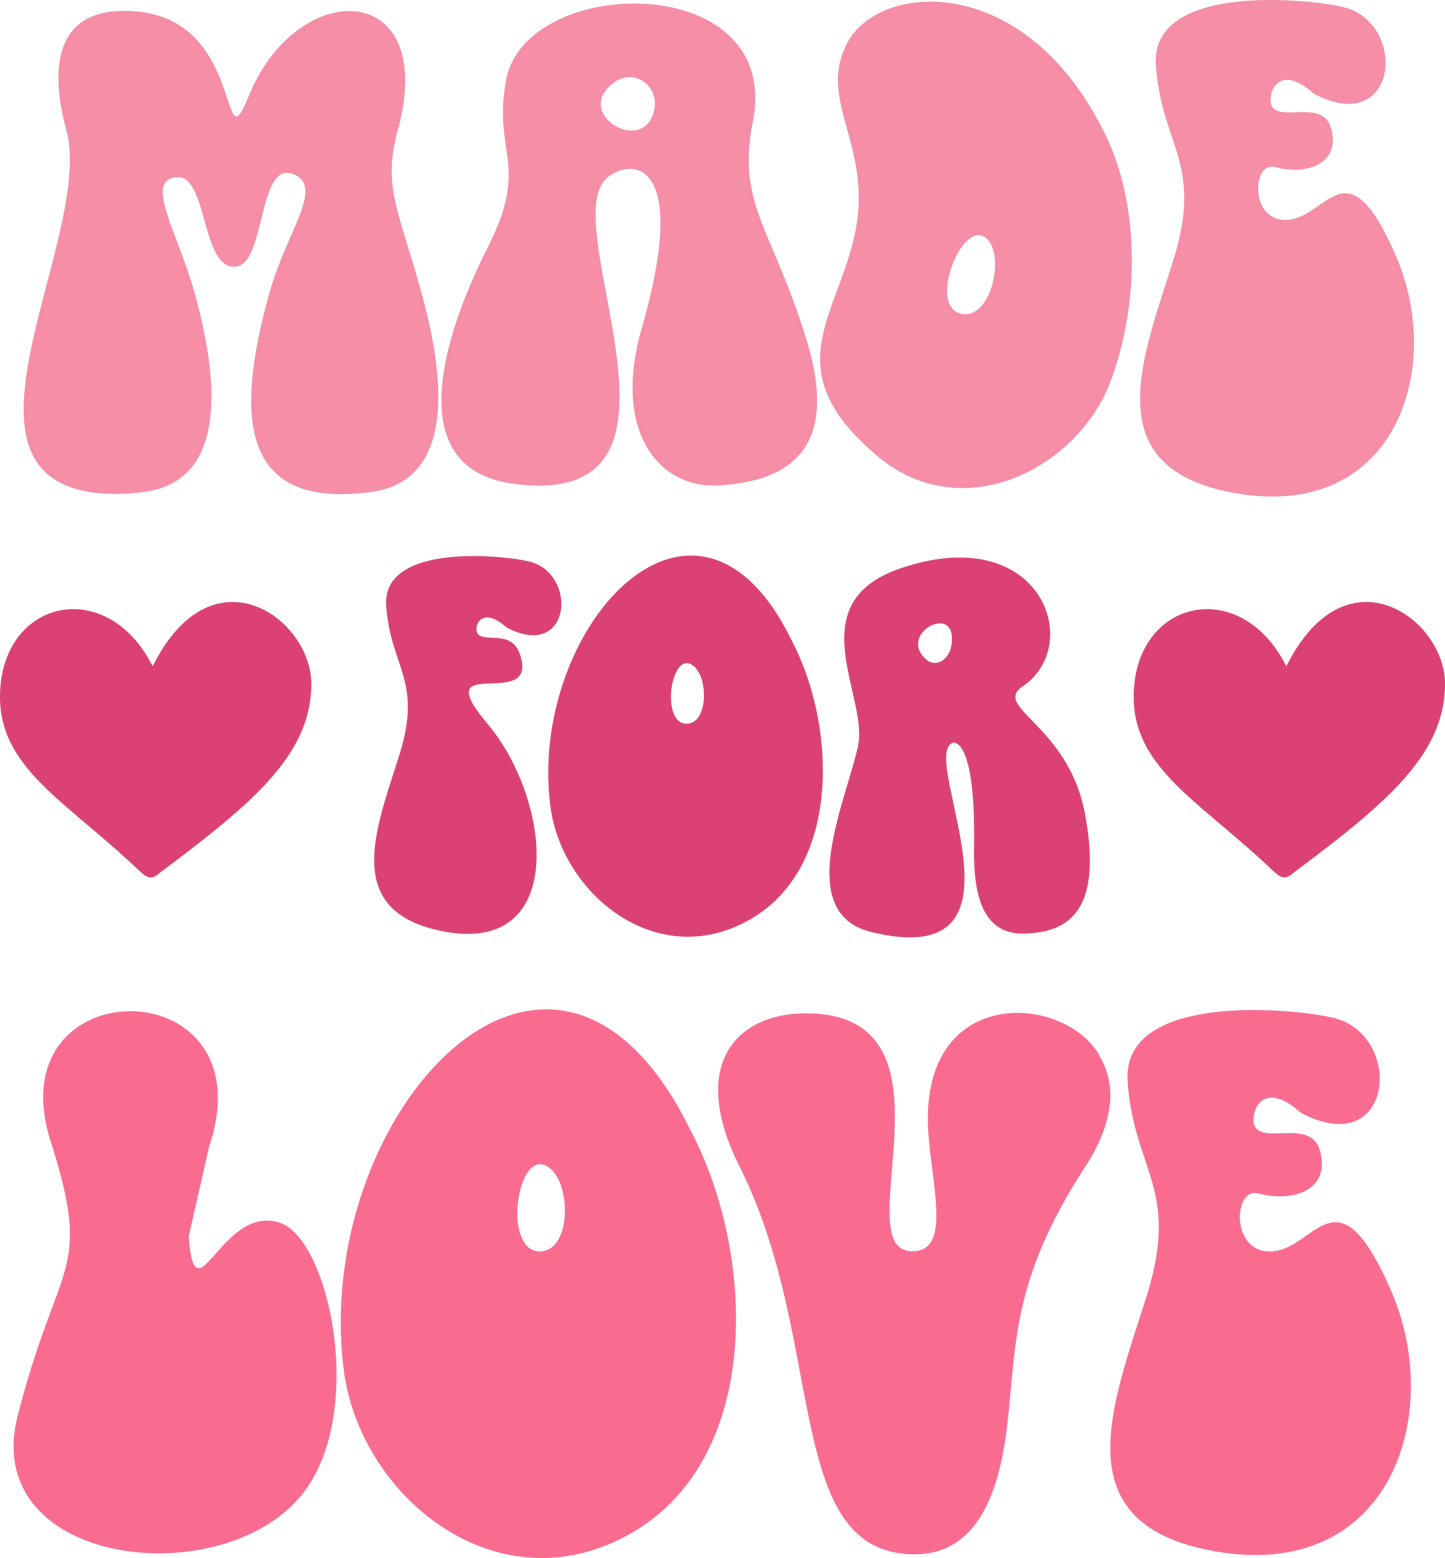 VALENTINE'S DAY PRINT 204 - made for love